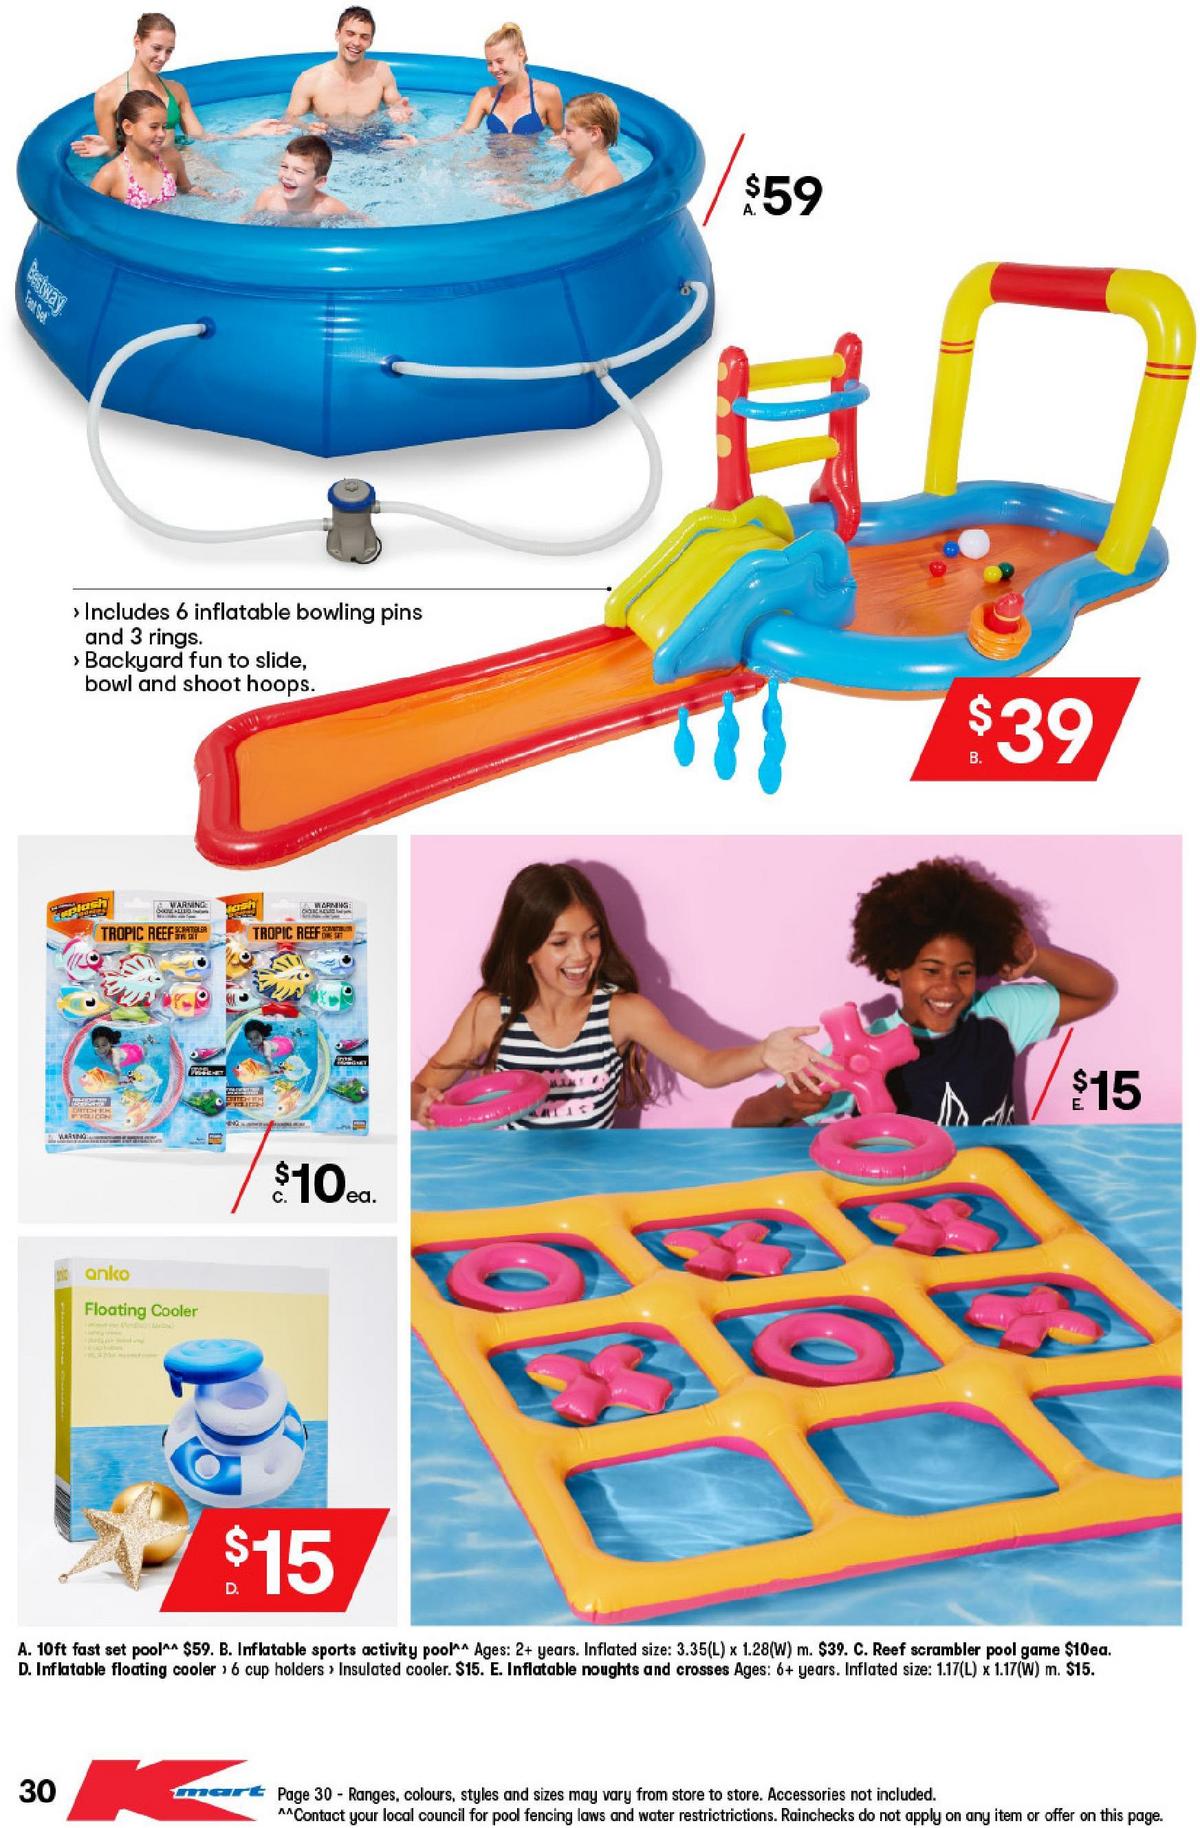 Kmart Joy to Your Christmas Catalogues from 3 December